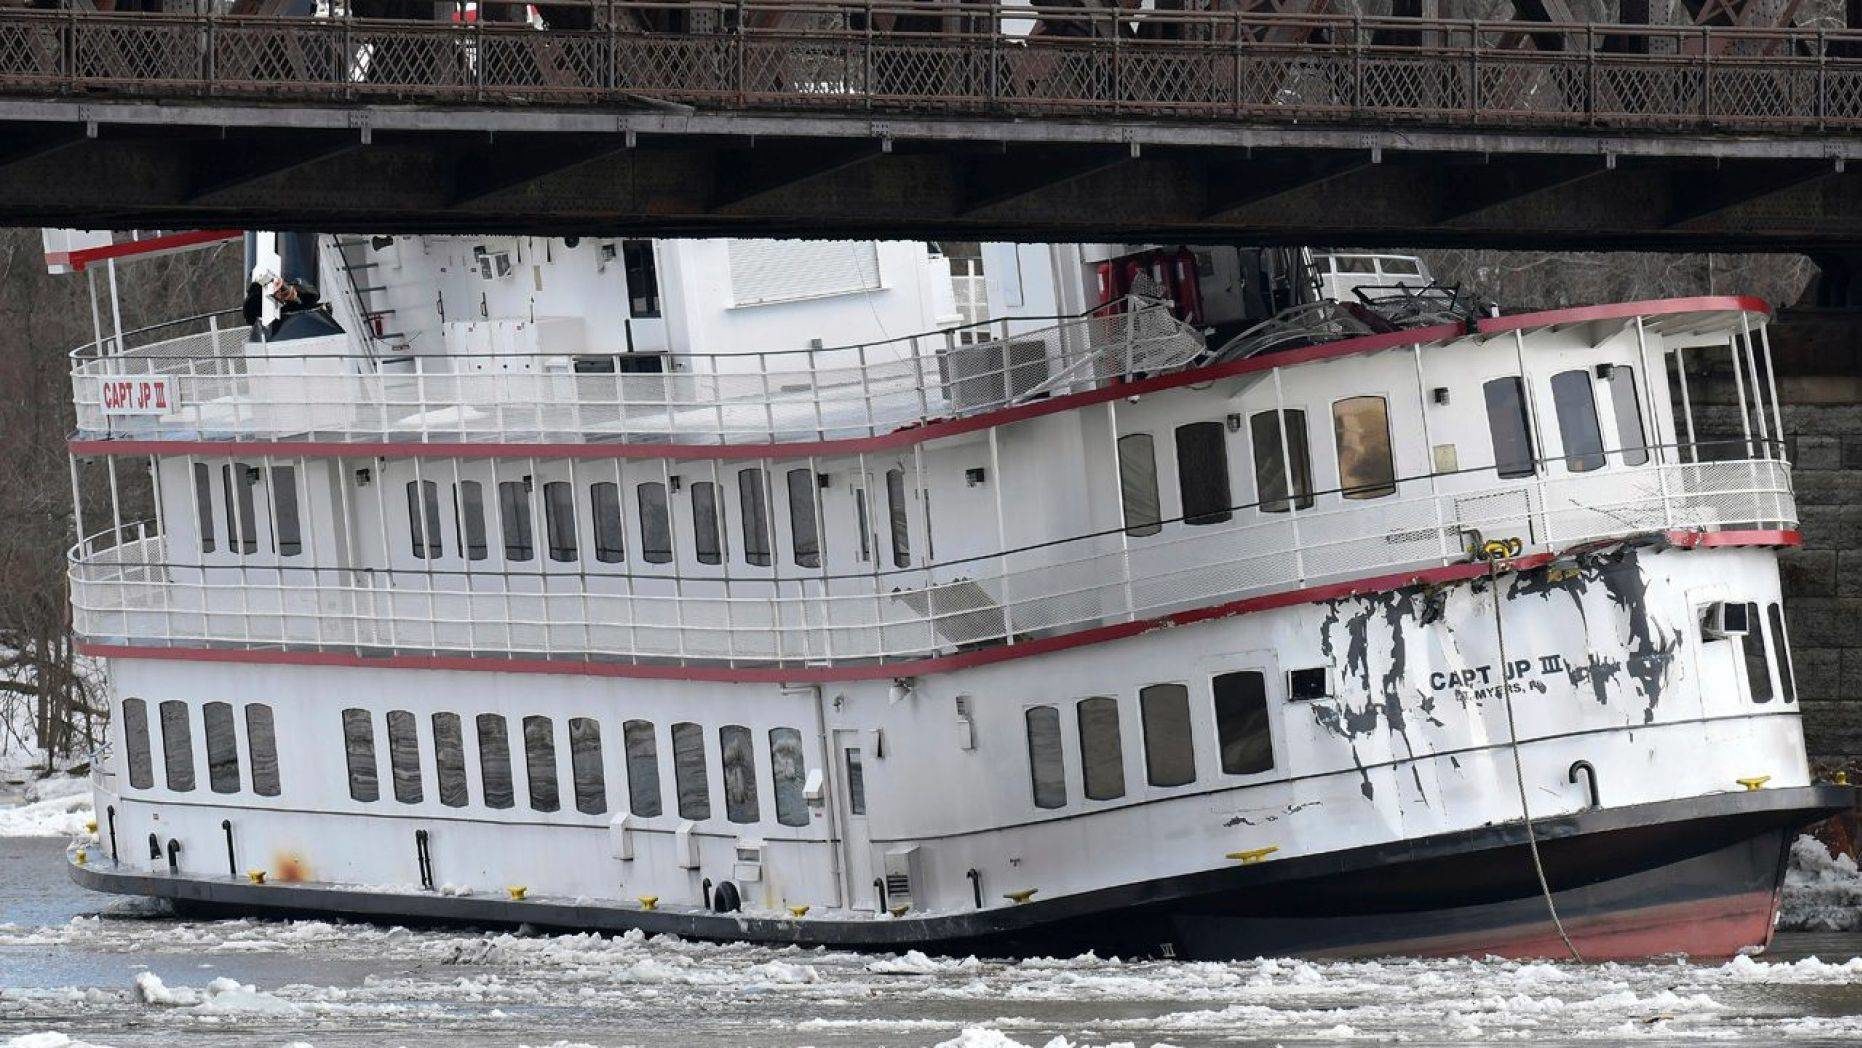 Captain JP III cruise ship is wedged against